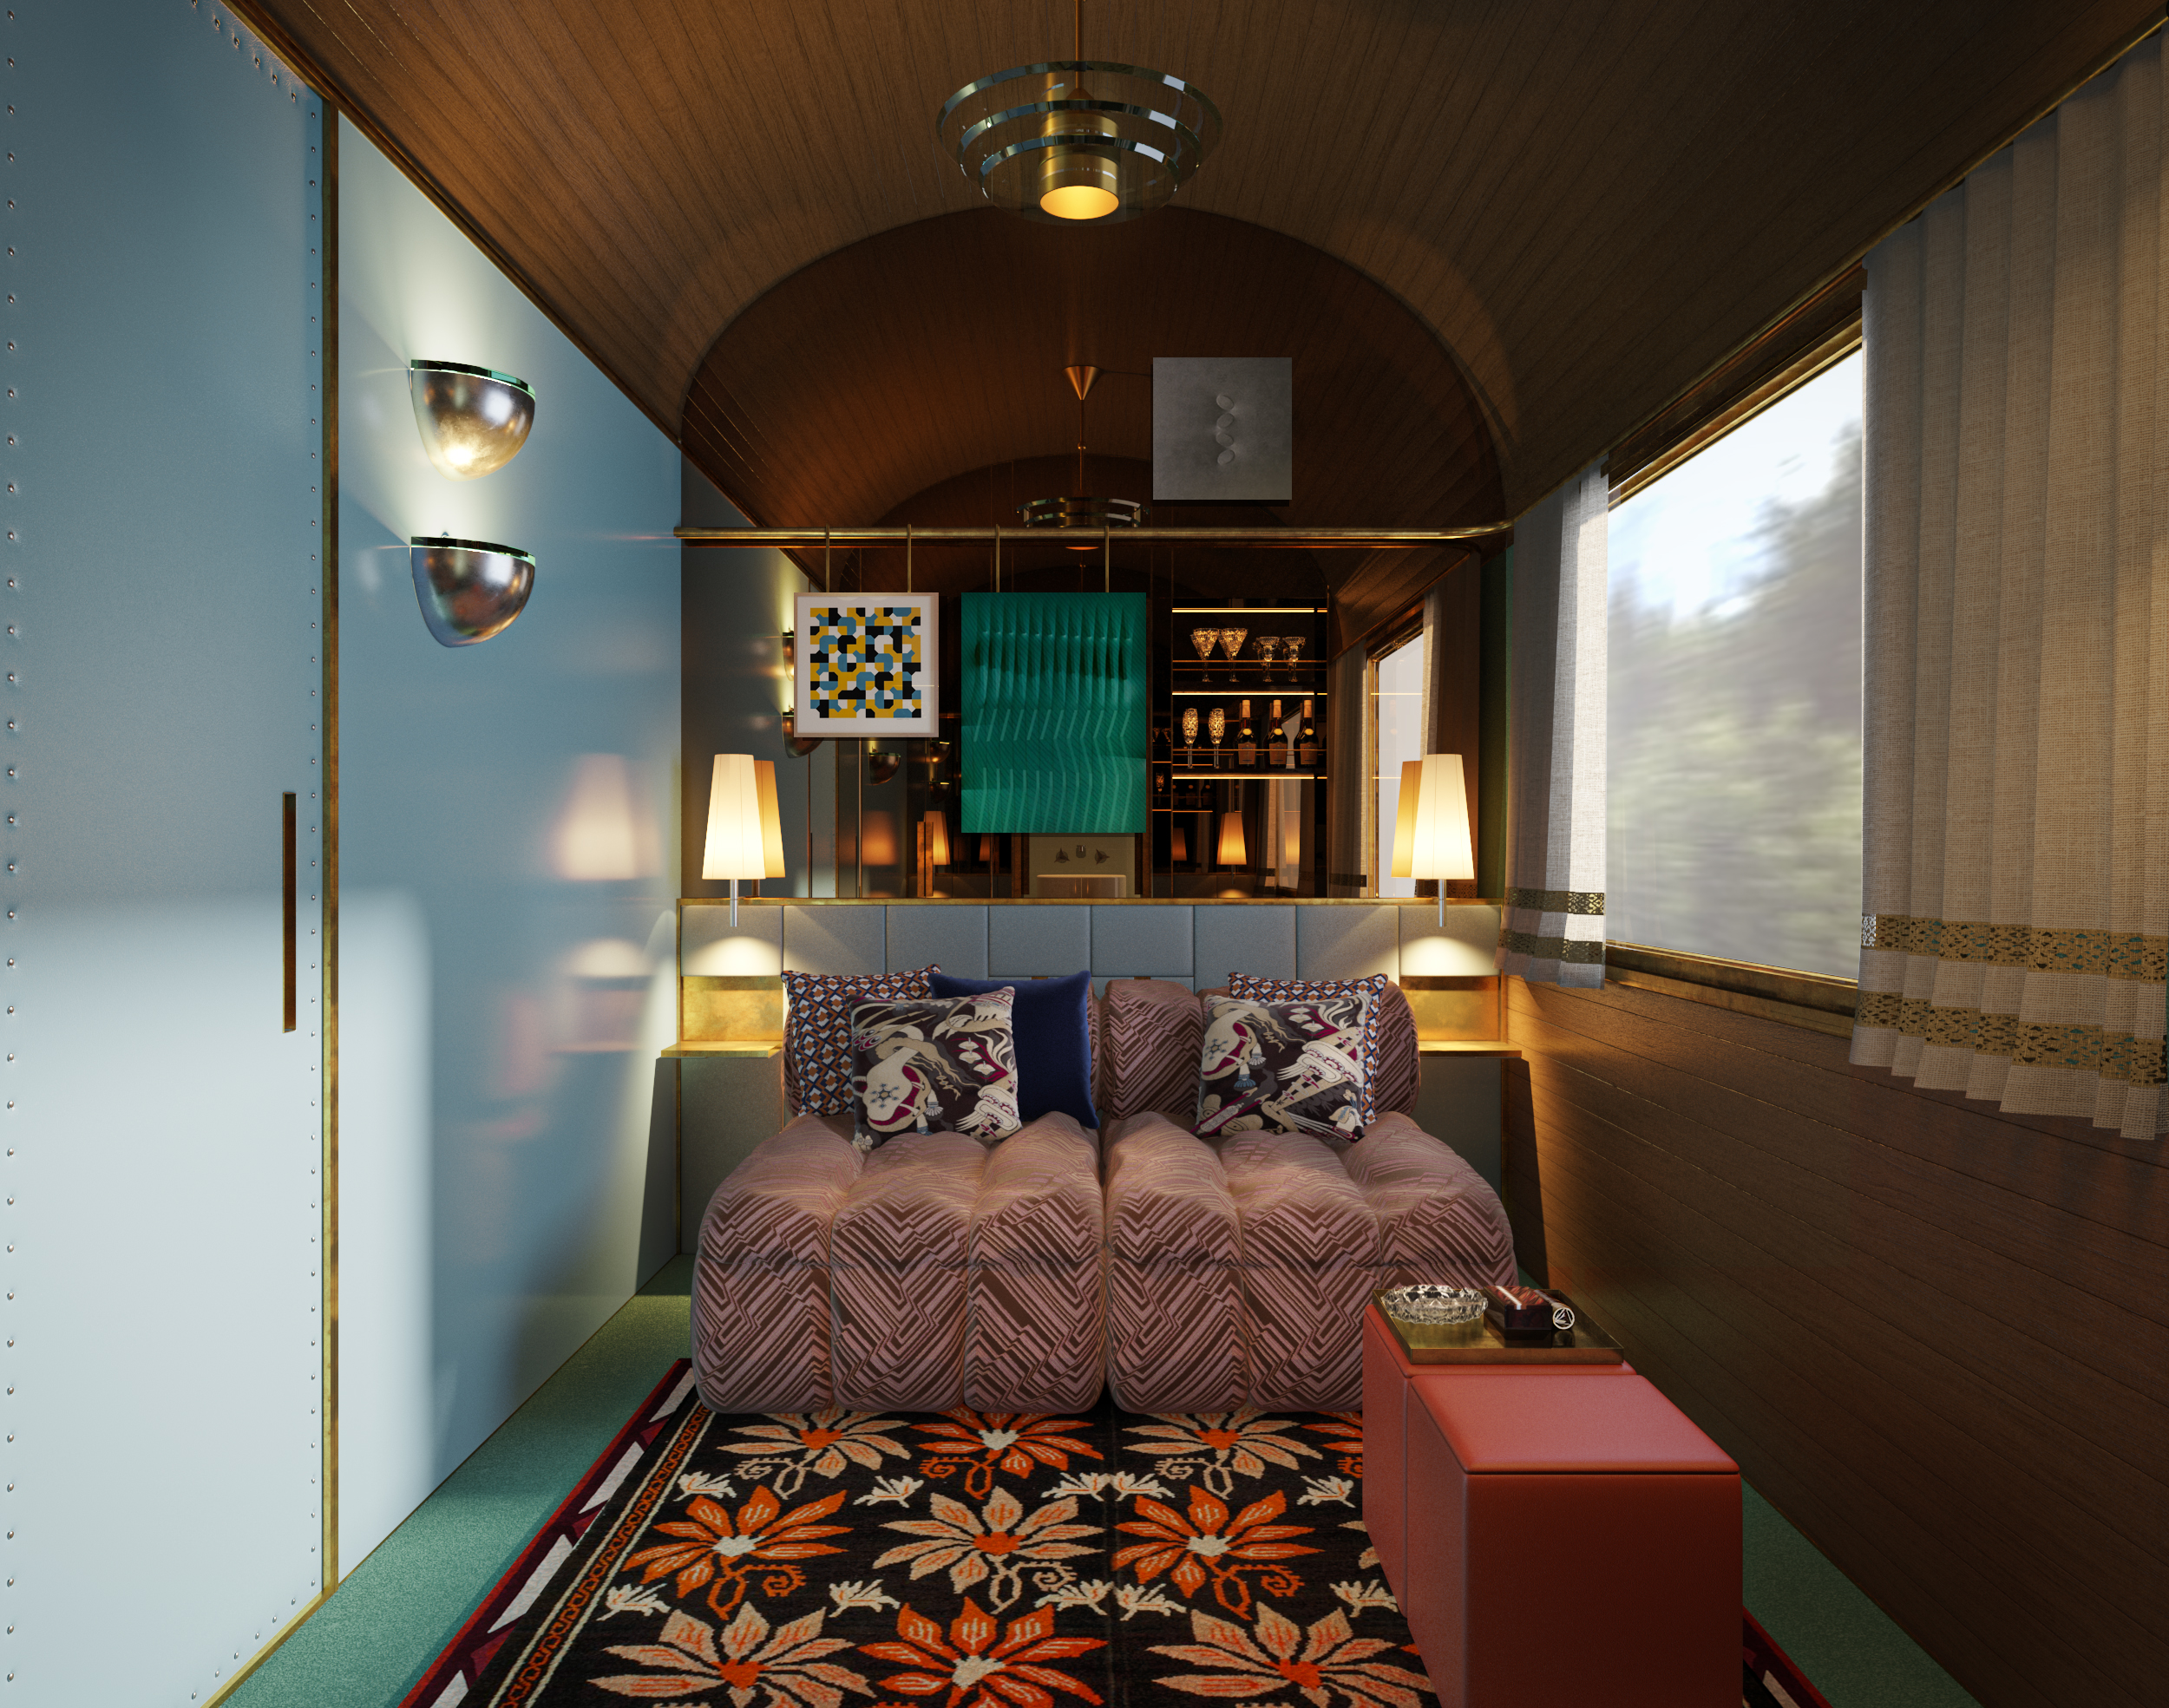 Accor's new Orient Express brand is set to launch its new Orient Express La Dolce Vita train experiences in Italy, capturing the glamour of 1960s rail travel. 